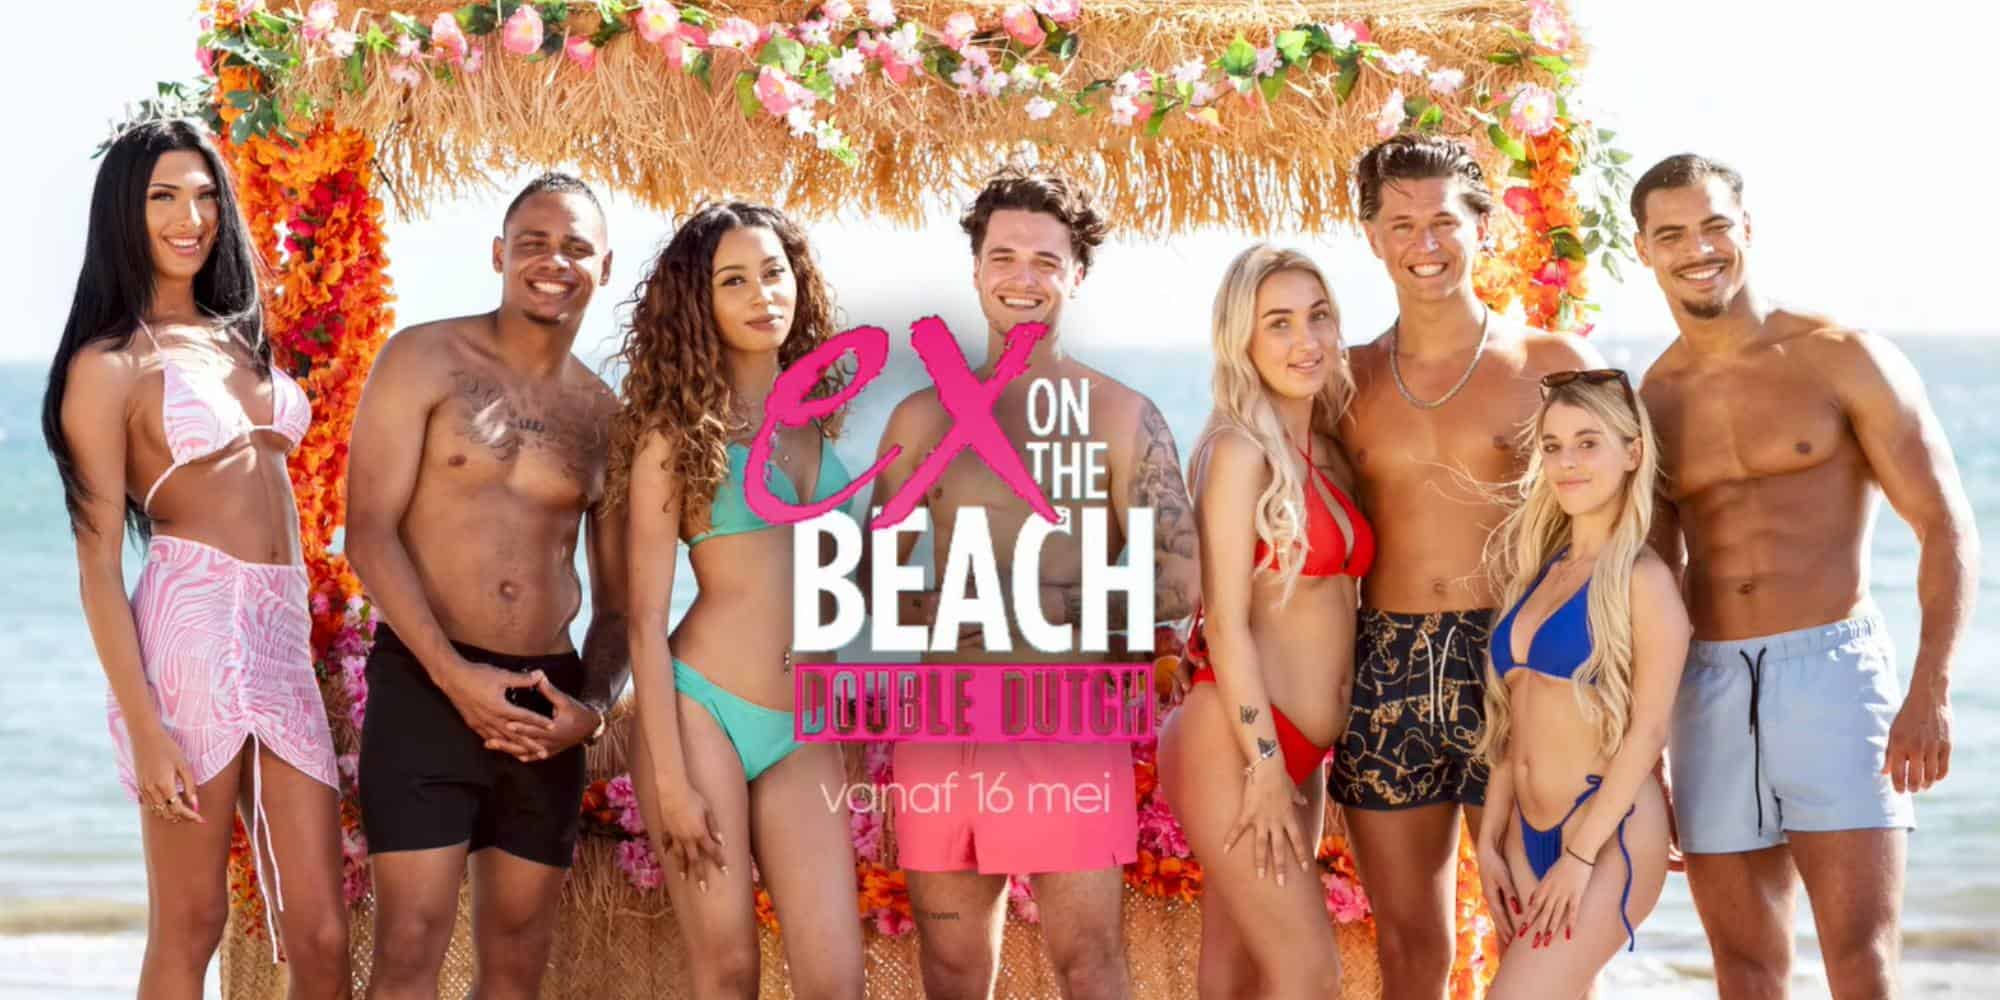 How To Watch Ex On The Beach Double Dutch Season 9 Episodes?